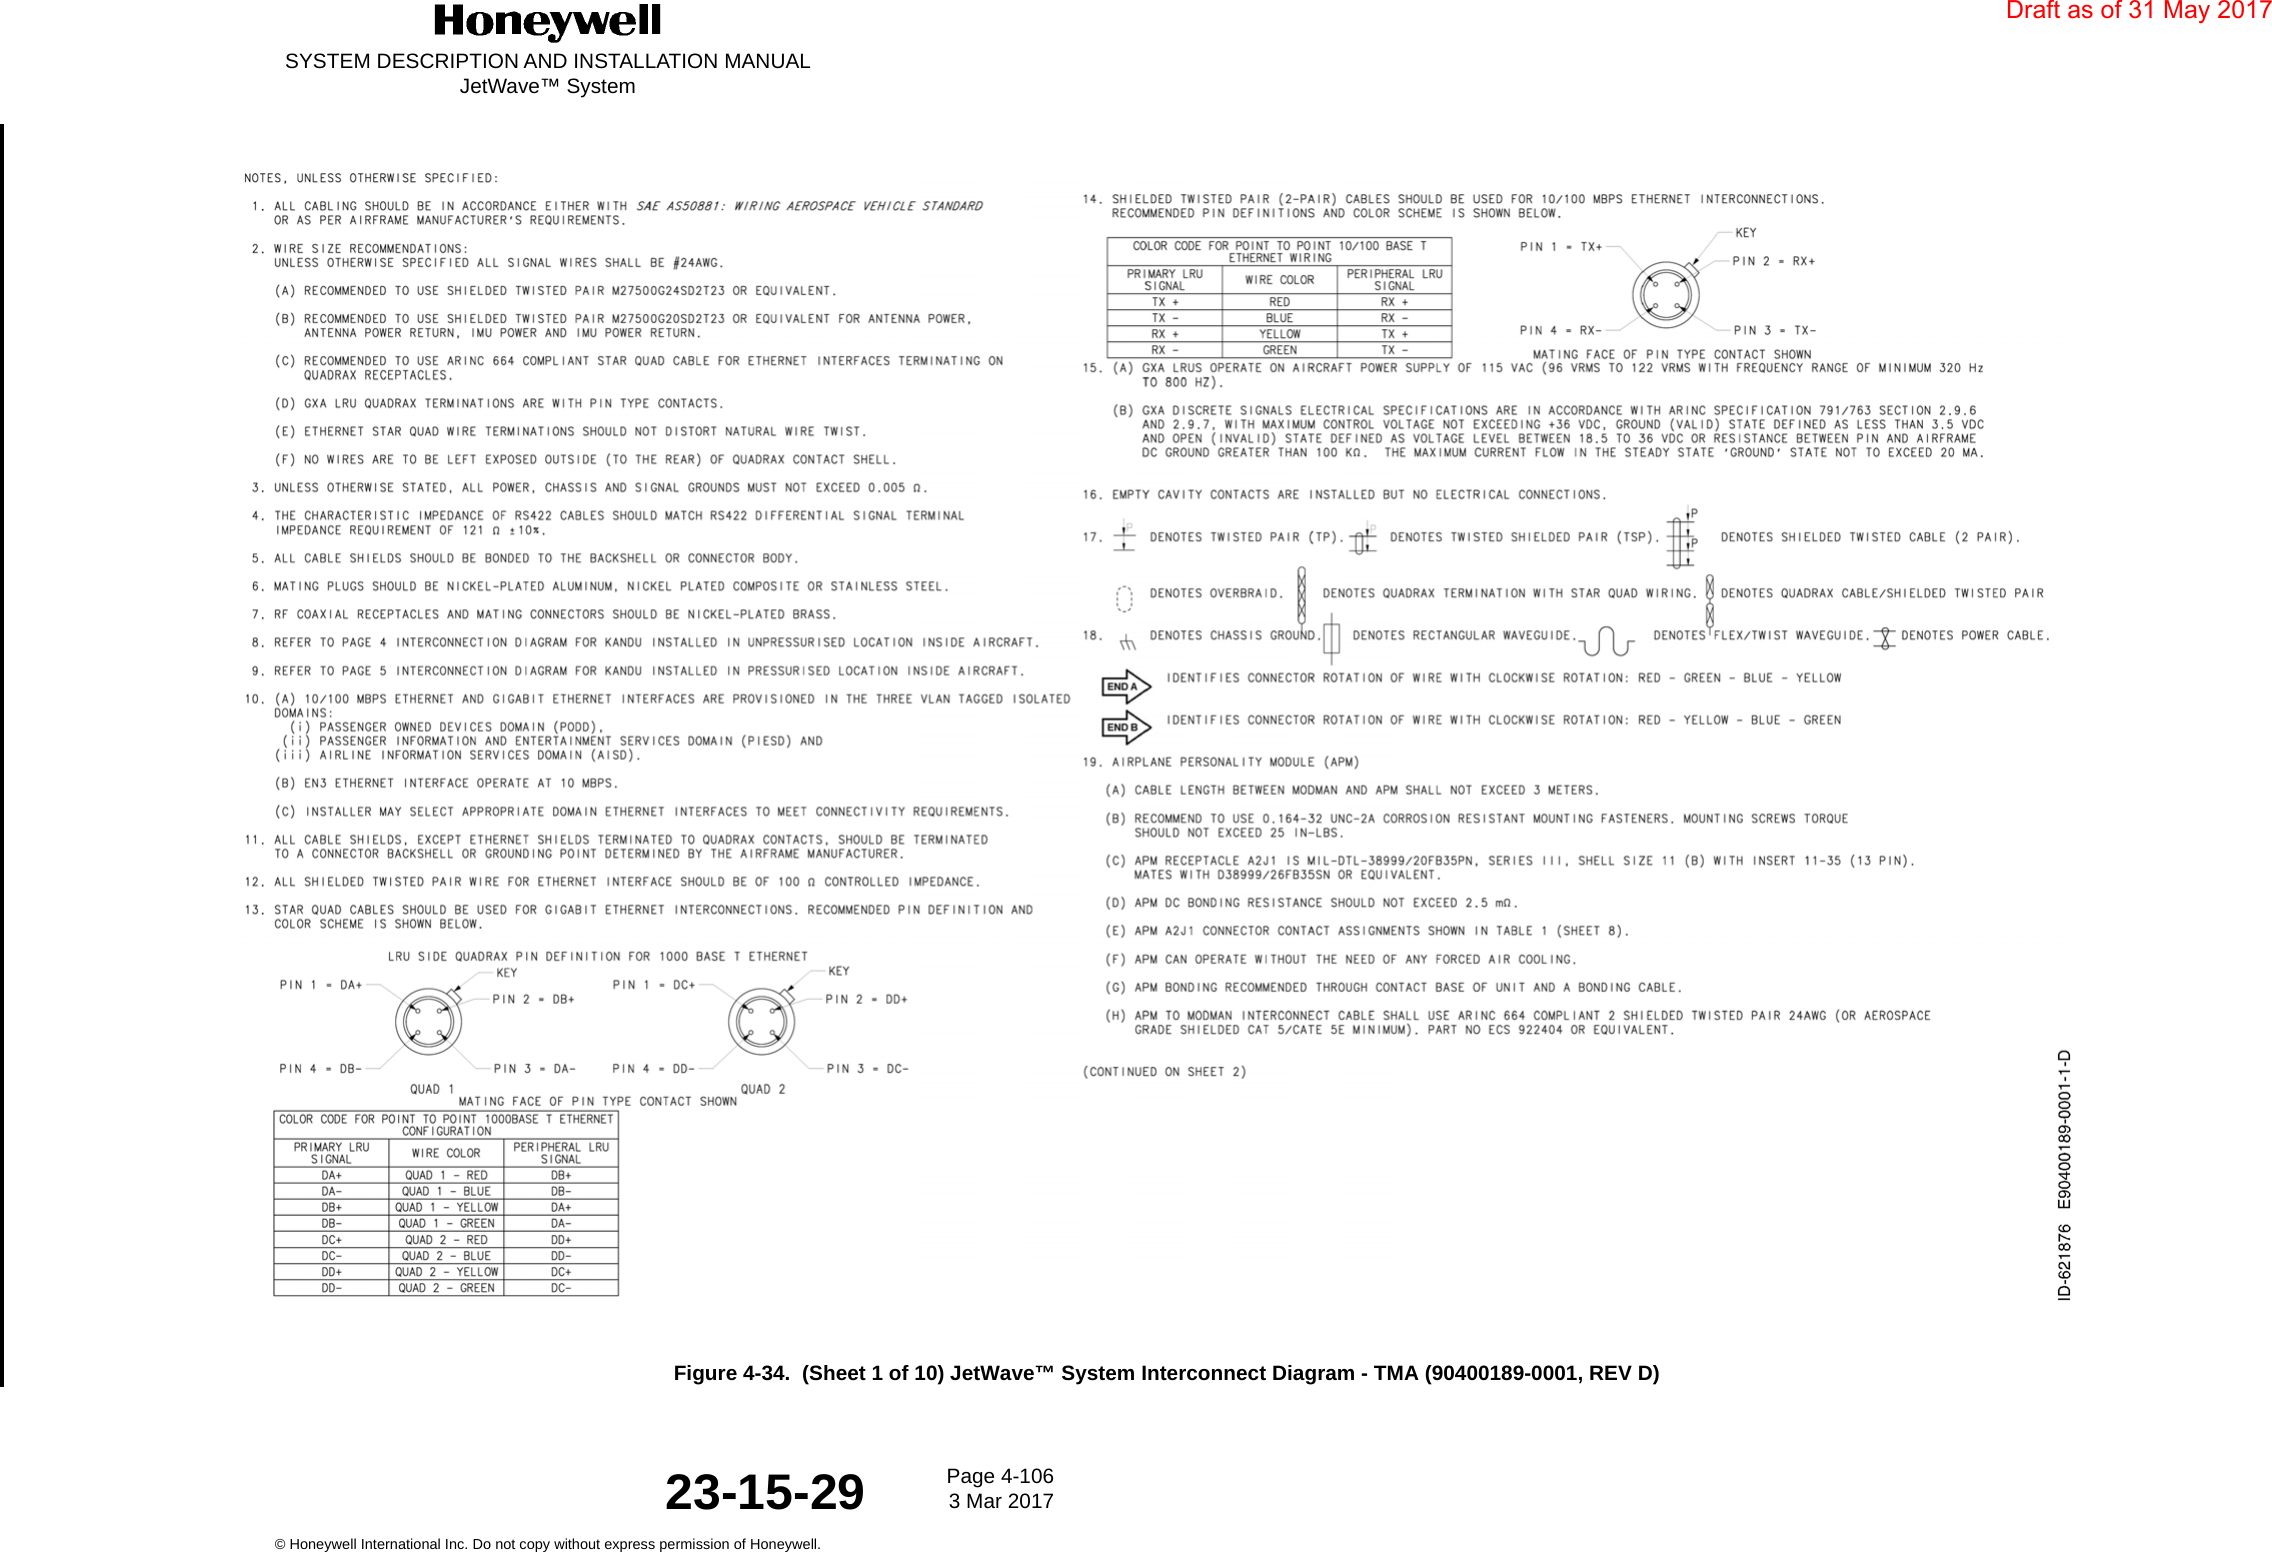 SYSTEM DESCRIPTION AND INSTALLATION MANUALJetWave™ SystemPage 4-106 3 Mar 2017© Honeywell International Inc. Do not copy without express permission of Honeywell.23-15-29Figure 4-34.  (Sheet 1 of 10) JetWave™ System Interconnect Diagram - TMA (90400189-0001, REV D)Draft as of 31 May 2017